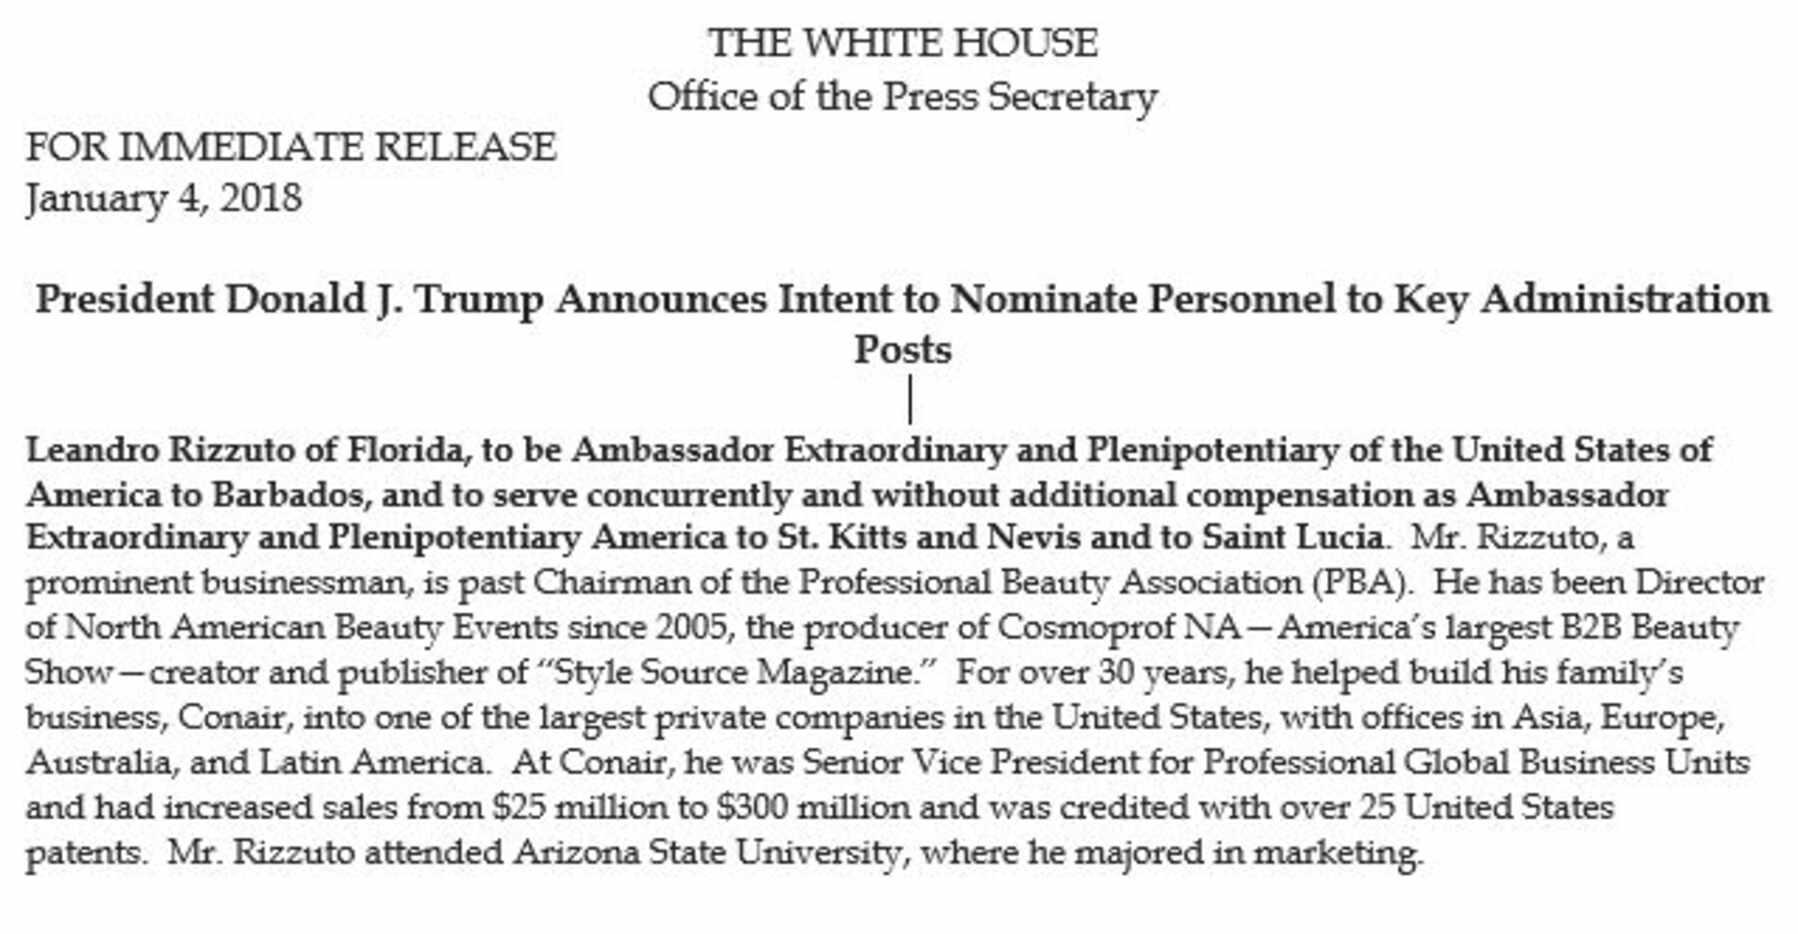 The White House announced the Rizzuto nomination on Jan. 4.